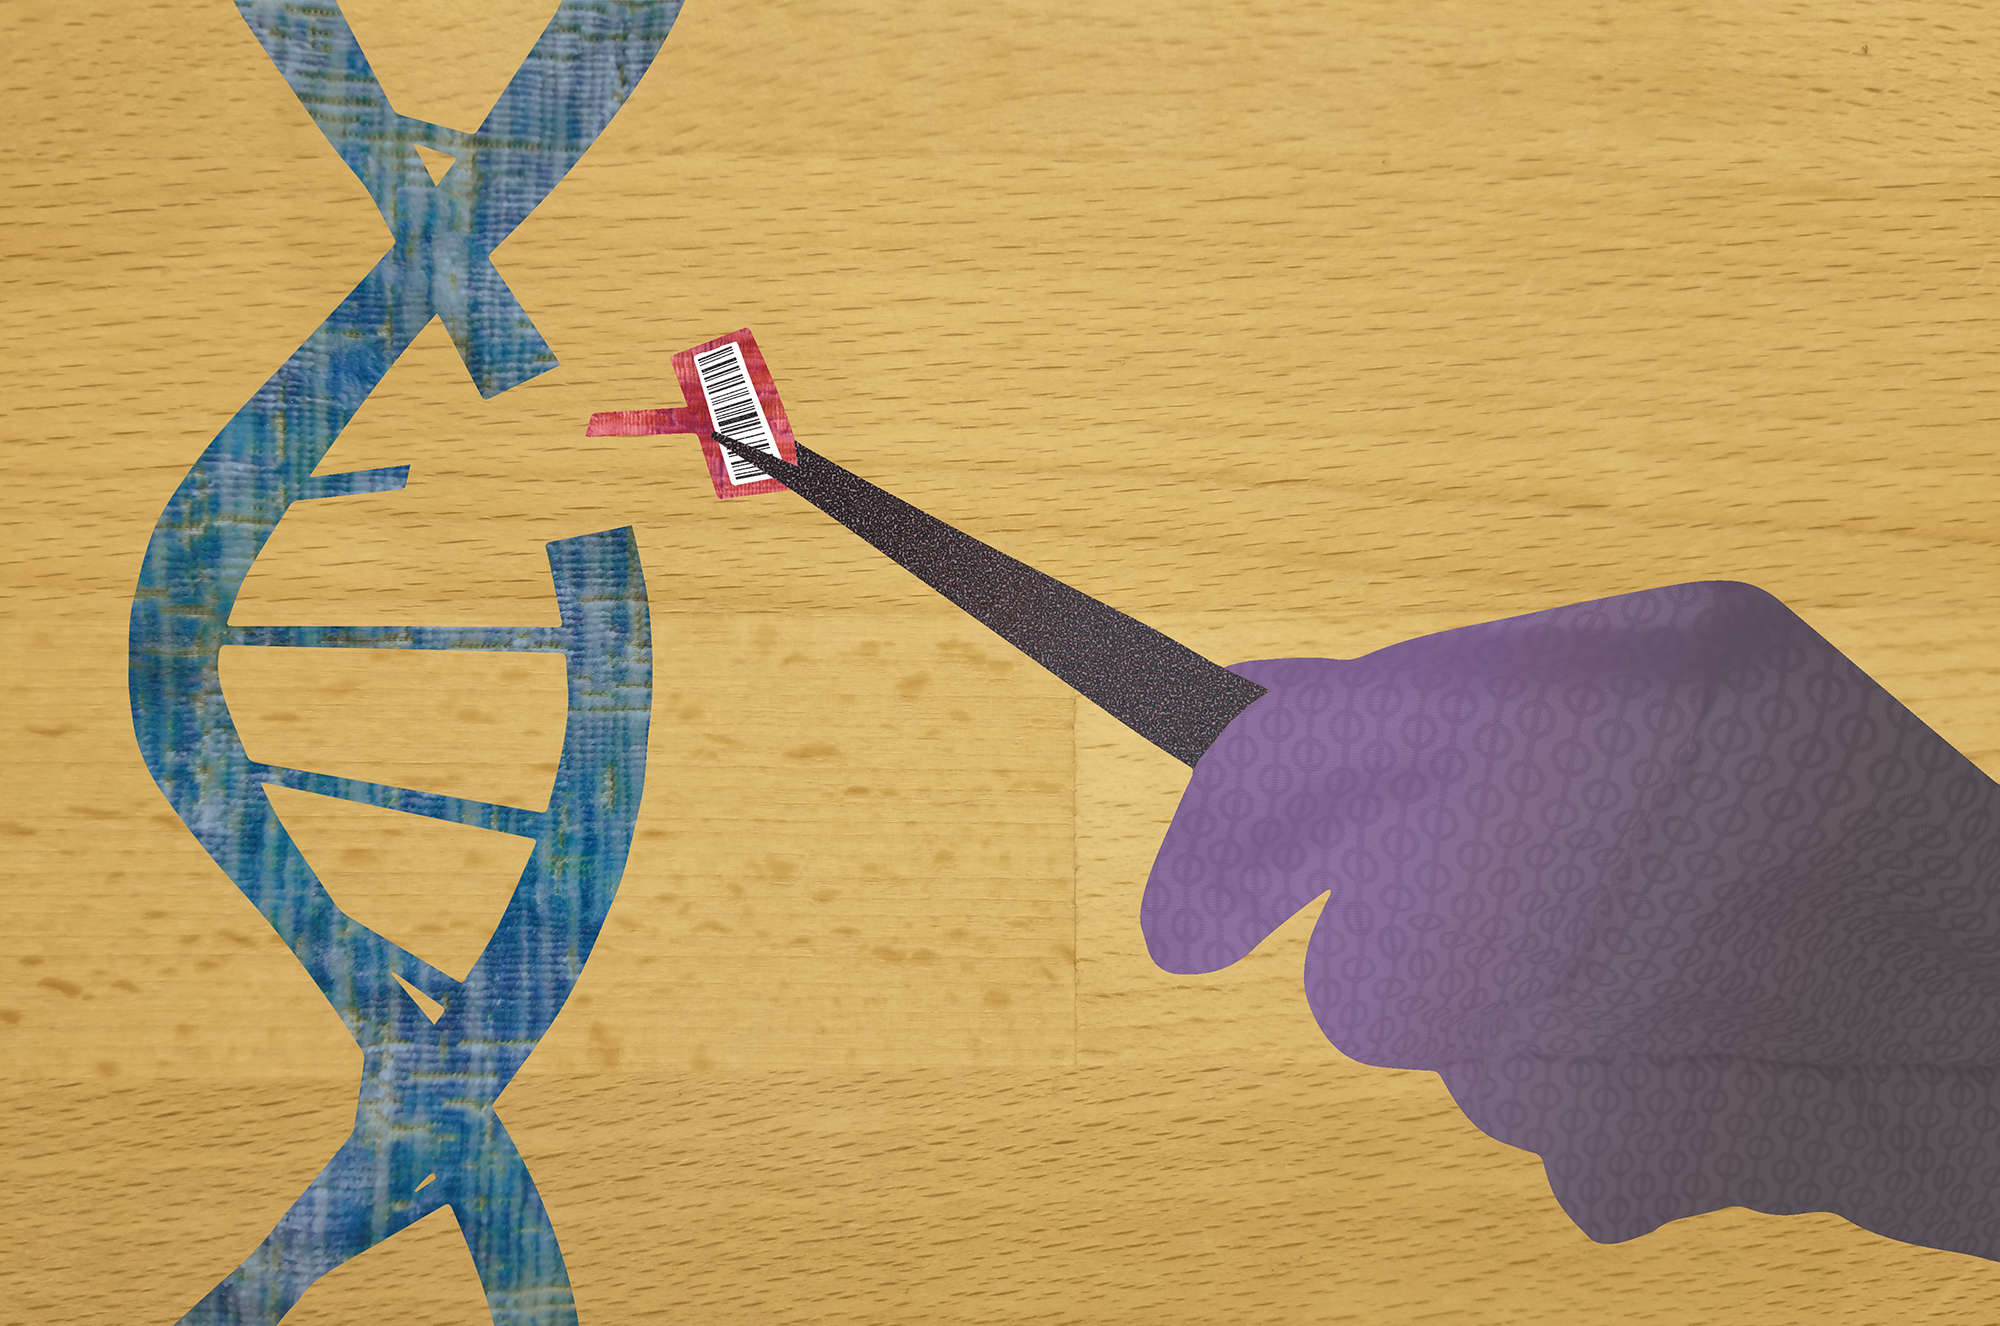 Artwork shows a hand with tweezers inserting a piece of DNA in a larger strand. The smaller piece has a black and white barcode attached.